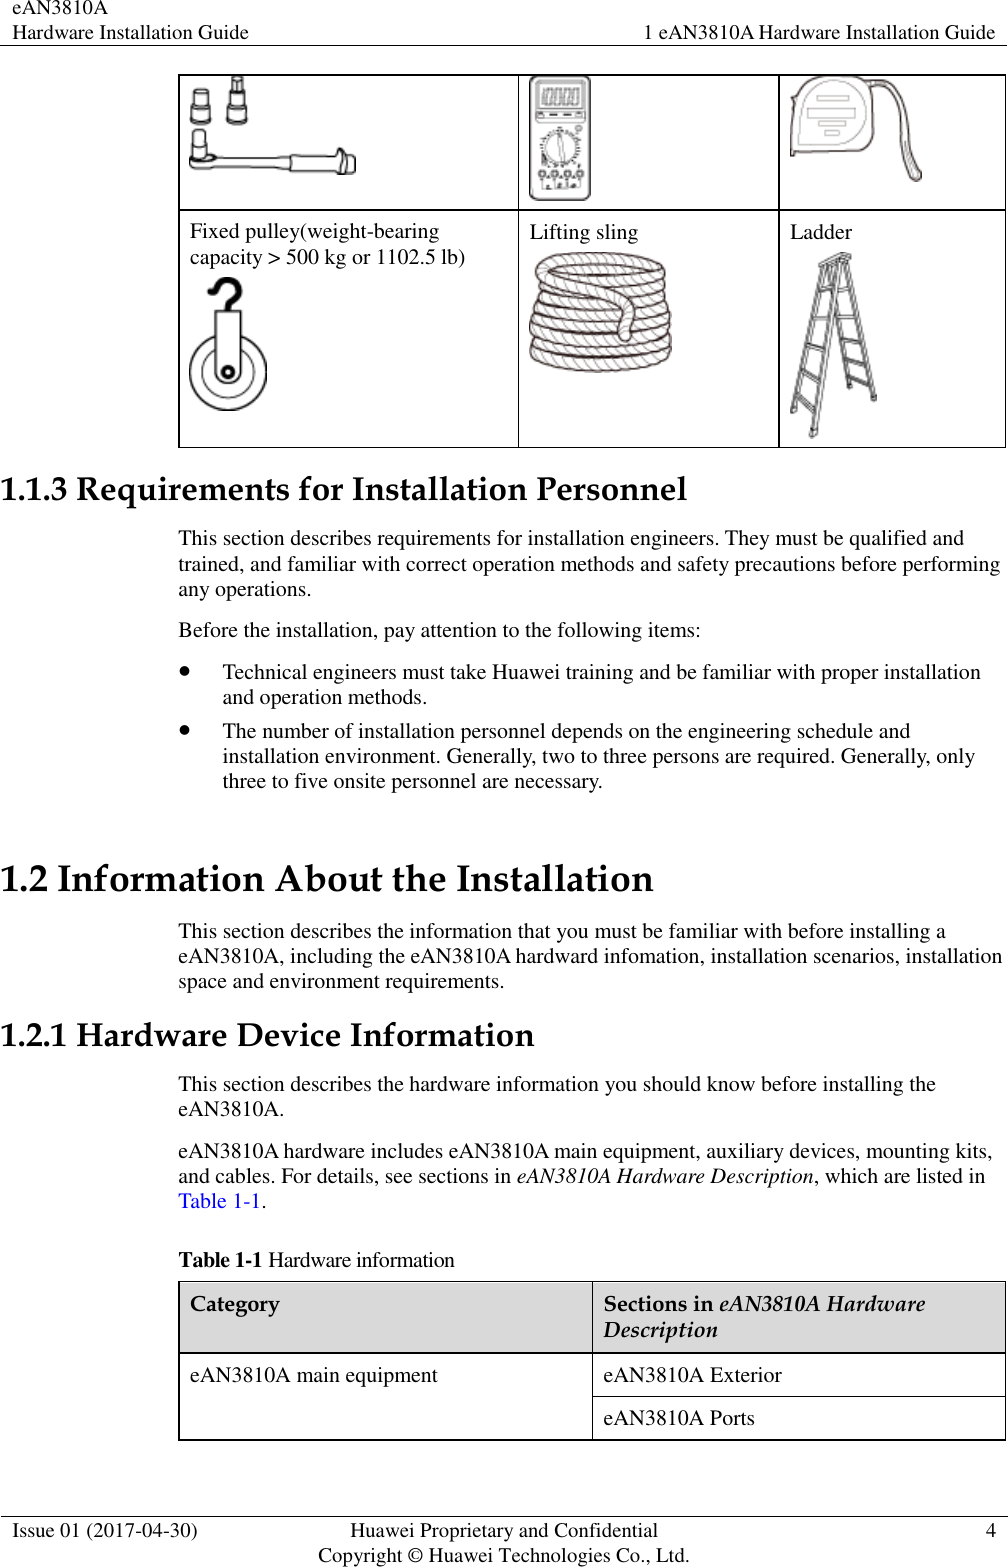 eAN3810A   Hardware Installation Guide 1 eAN3810A Hardware Installation Guide  Issue 01 (2017-04-30) Huawei Proprietary and Confidential                                     Copyright © Huawei Technologies Co., Ltd. 4     Fixed pulley(weight-bearing capacity &gt; 500 kg or 1102.5 lb)  Lifting sling  Ladder  1.1.3 Requirements for Installation Personnel This section describes requirements for installation engineers. They must be qualified and trained, and familiar with correct operation methods and safety precautions before performing any operations. Before the installation, pay attention to the following items:    Technical engineers must take Huawei training and be familiar with proper installation and operation methods.  The number of installation personnel depends on the engineering schedule and installation environment. Generally, two to three persons are required. Generally, only three to five onsite personnel are necessary.   1.2 Information About the Installation This section describes the information that you must be familiar with before installing a eAN3810A, including the eAN3810A hardward infomation, installation scenarios, installation space and environment requirements. 1.2.1 Hardware Device Information This section describes the hardware information you should know before installing the eAN3810A. eAN3810A hardware includes eAN3810A main equipment, auxiliary devices, mounting kits, and cables. For details, see sections in eAN3810A Hardware Description, which are listed in Table 1-1. Table 1-1 Hardware information Category Sections in eAN3810A Hardware Description eAN3810A main equipment eAN3810A Exterior eAN3810A Ports 